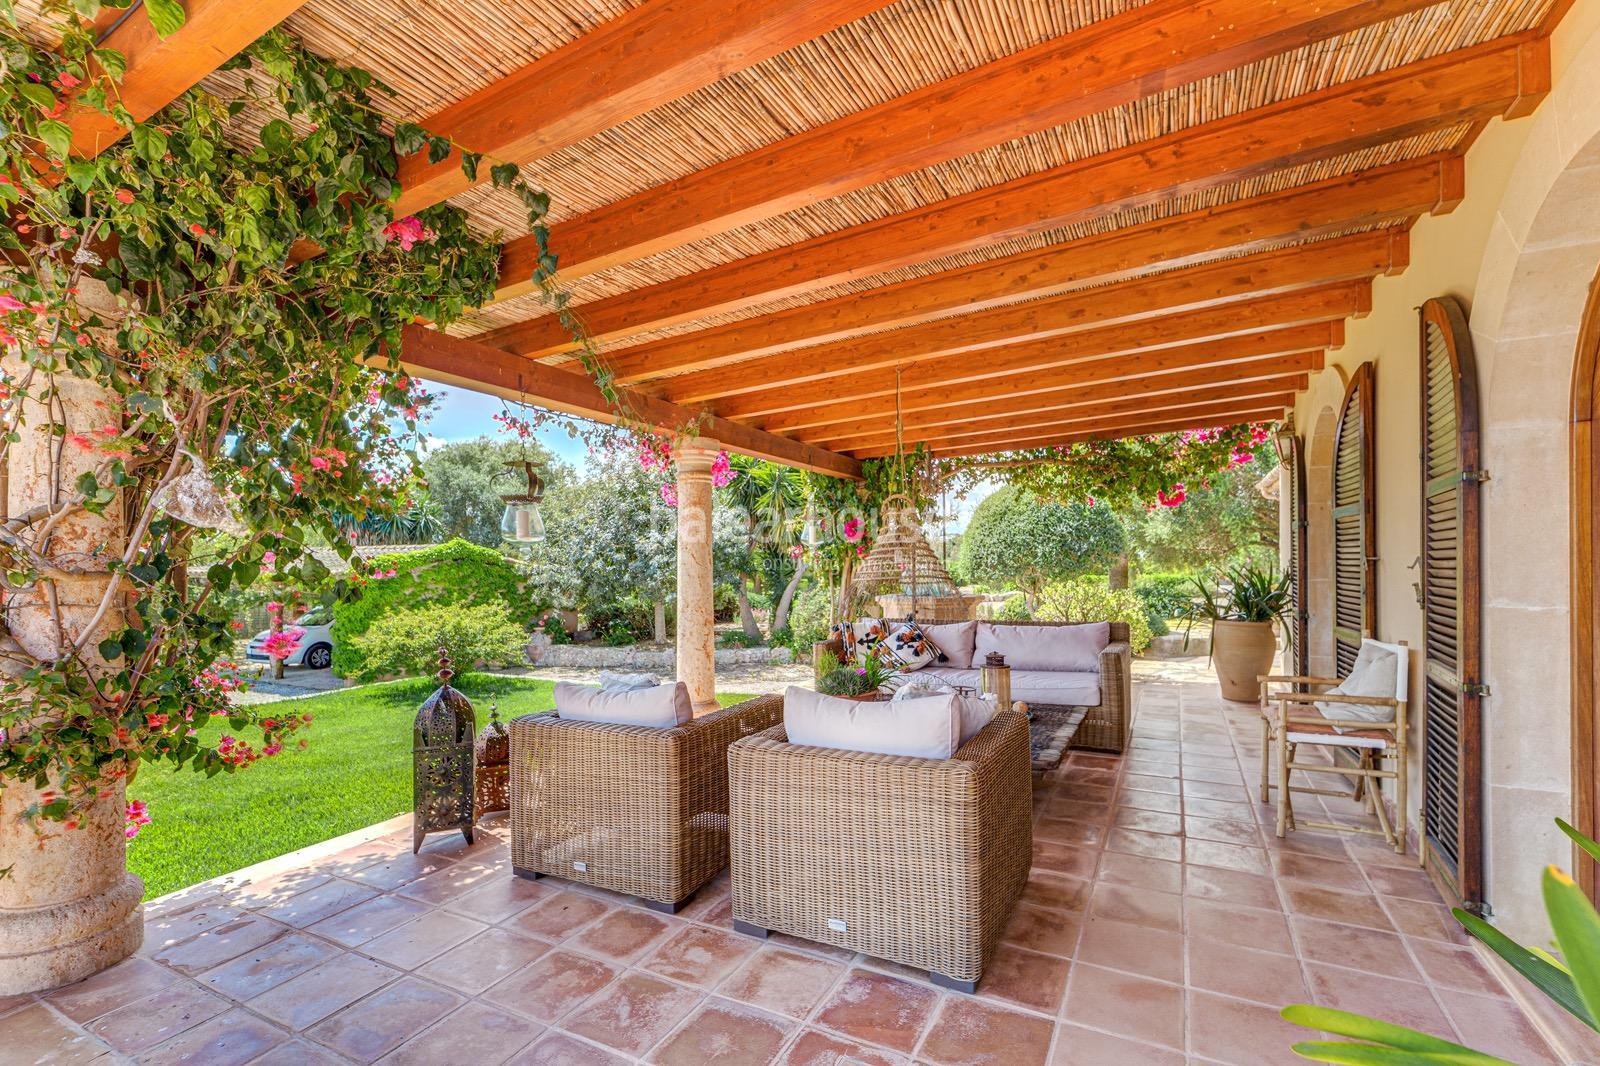 Beautiful finca with large outdoor garden areas, porches and swimming pool located close to beaches.